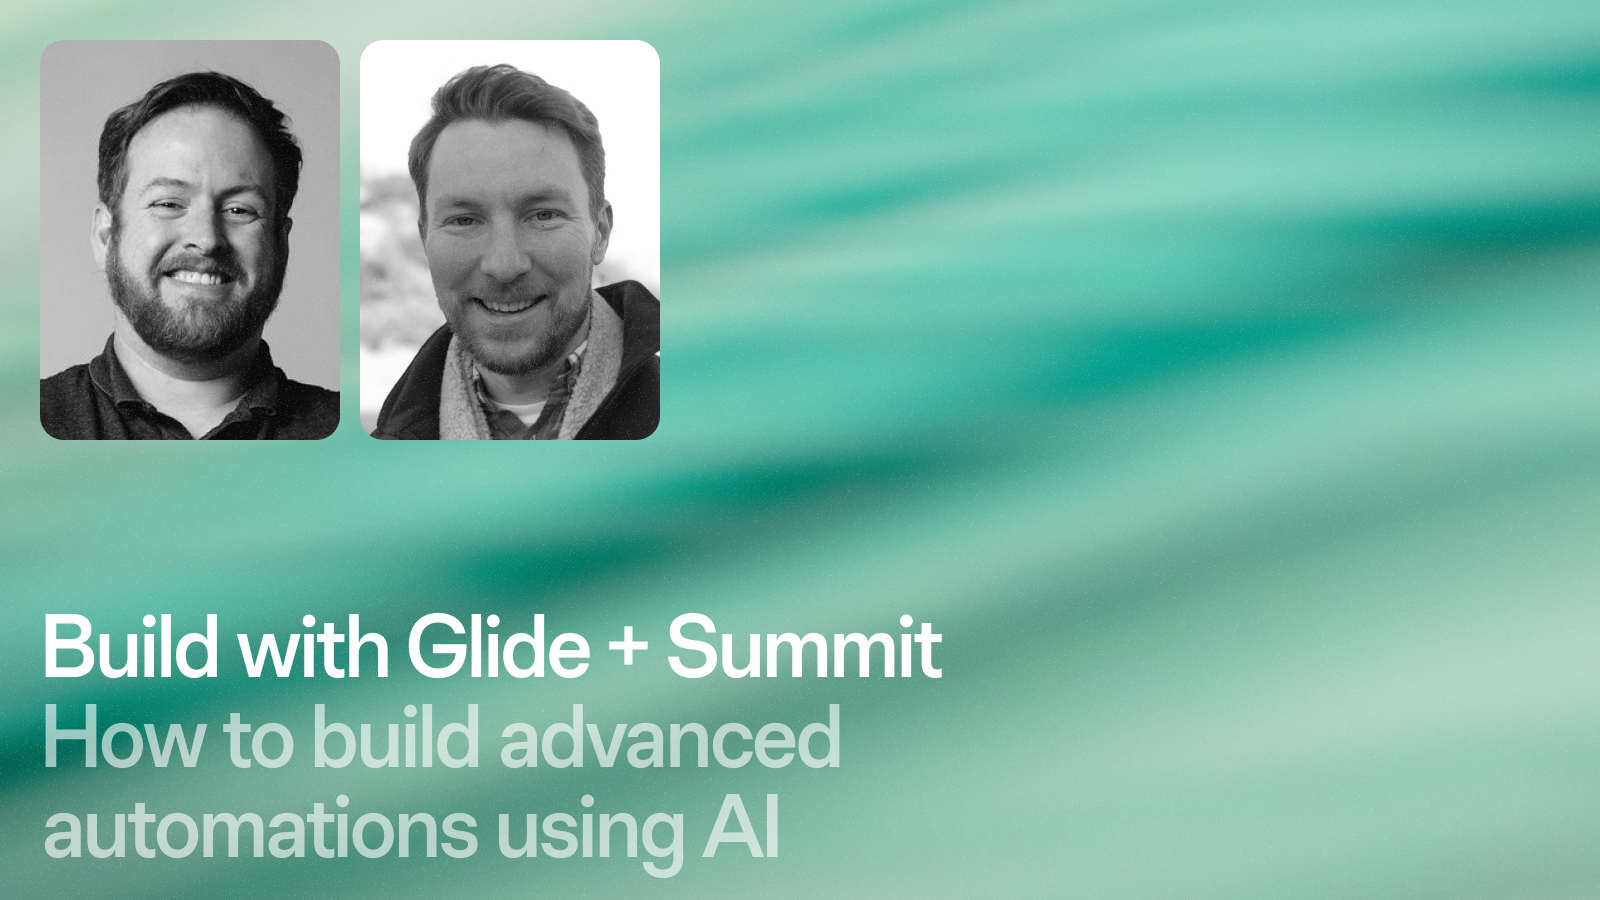 How to build advanced automations using AI